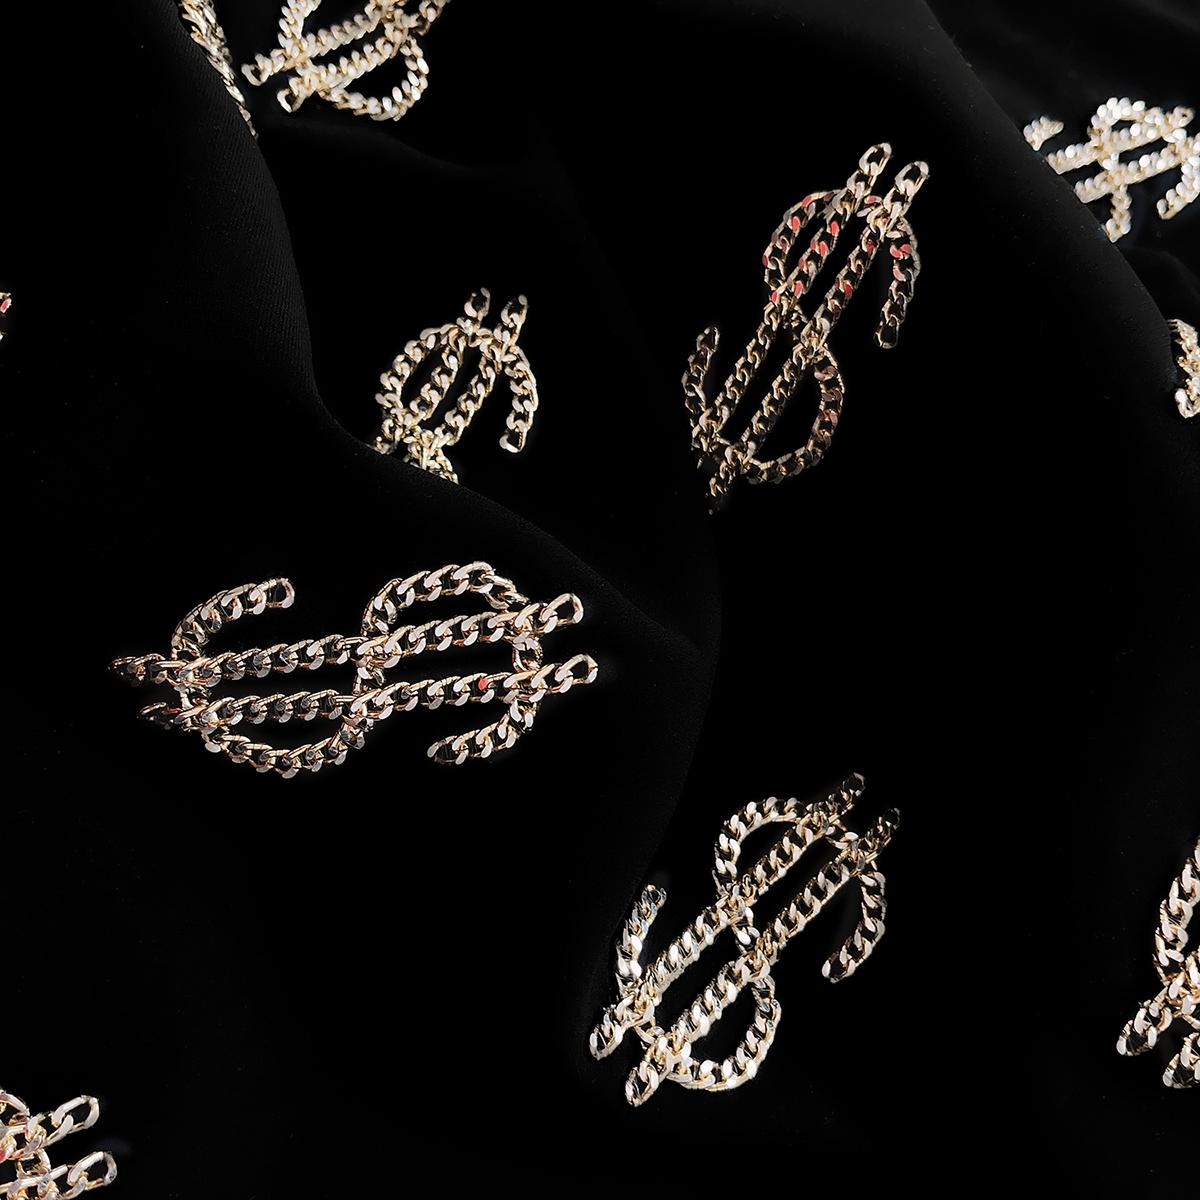 Iconique MOSCHINO Couture Dollar Sign Ensembe Black Dress Jacket Gold Chain Set  en vente 4